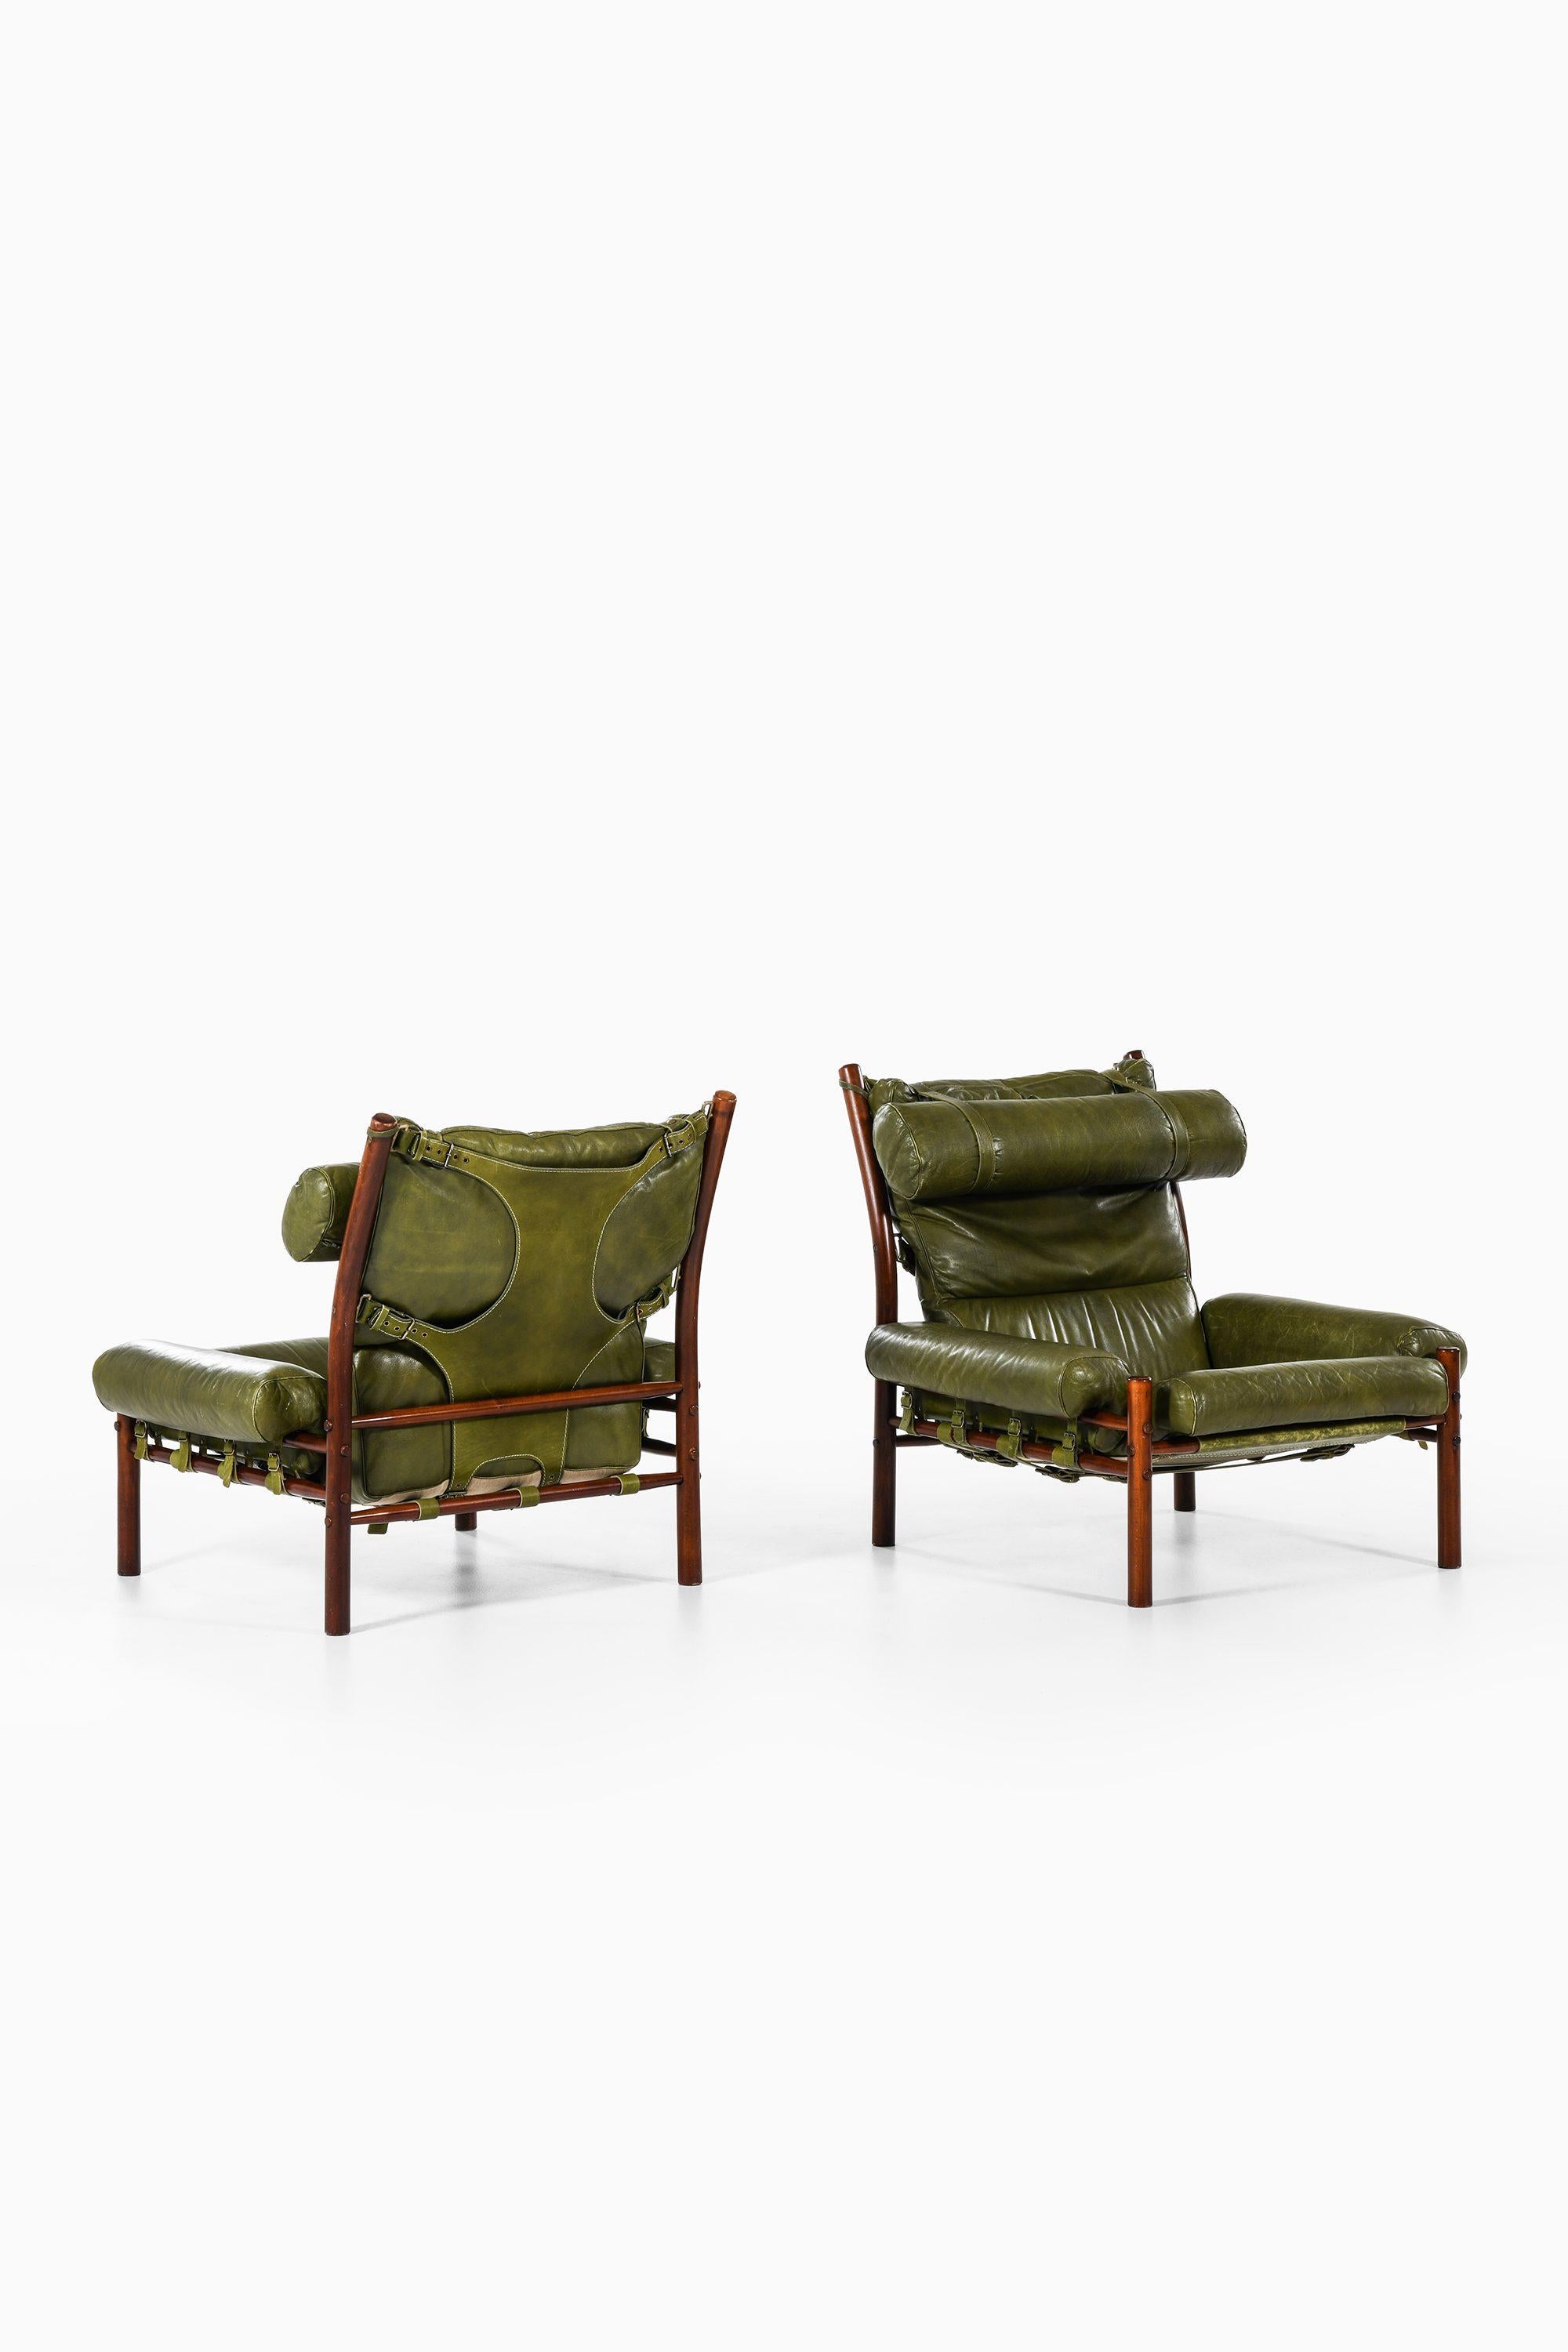 Pair of Easy Chairs in Beech, Green Leather and Brass by Arne Norell, 1960s

Additional Information:
Material: Dark stained beech, green leather, brass
Style: midcentury, Scandinavia
Pair of easy chairs model Inca
Produced by Arne Norell AB in